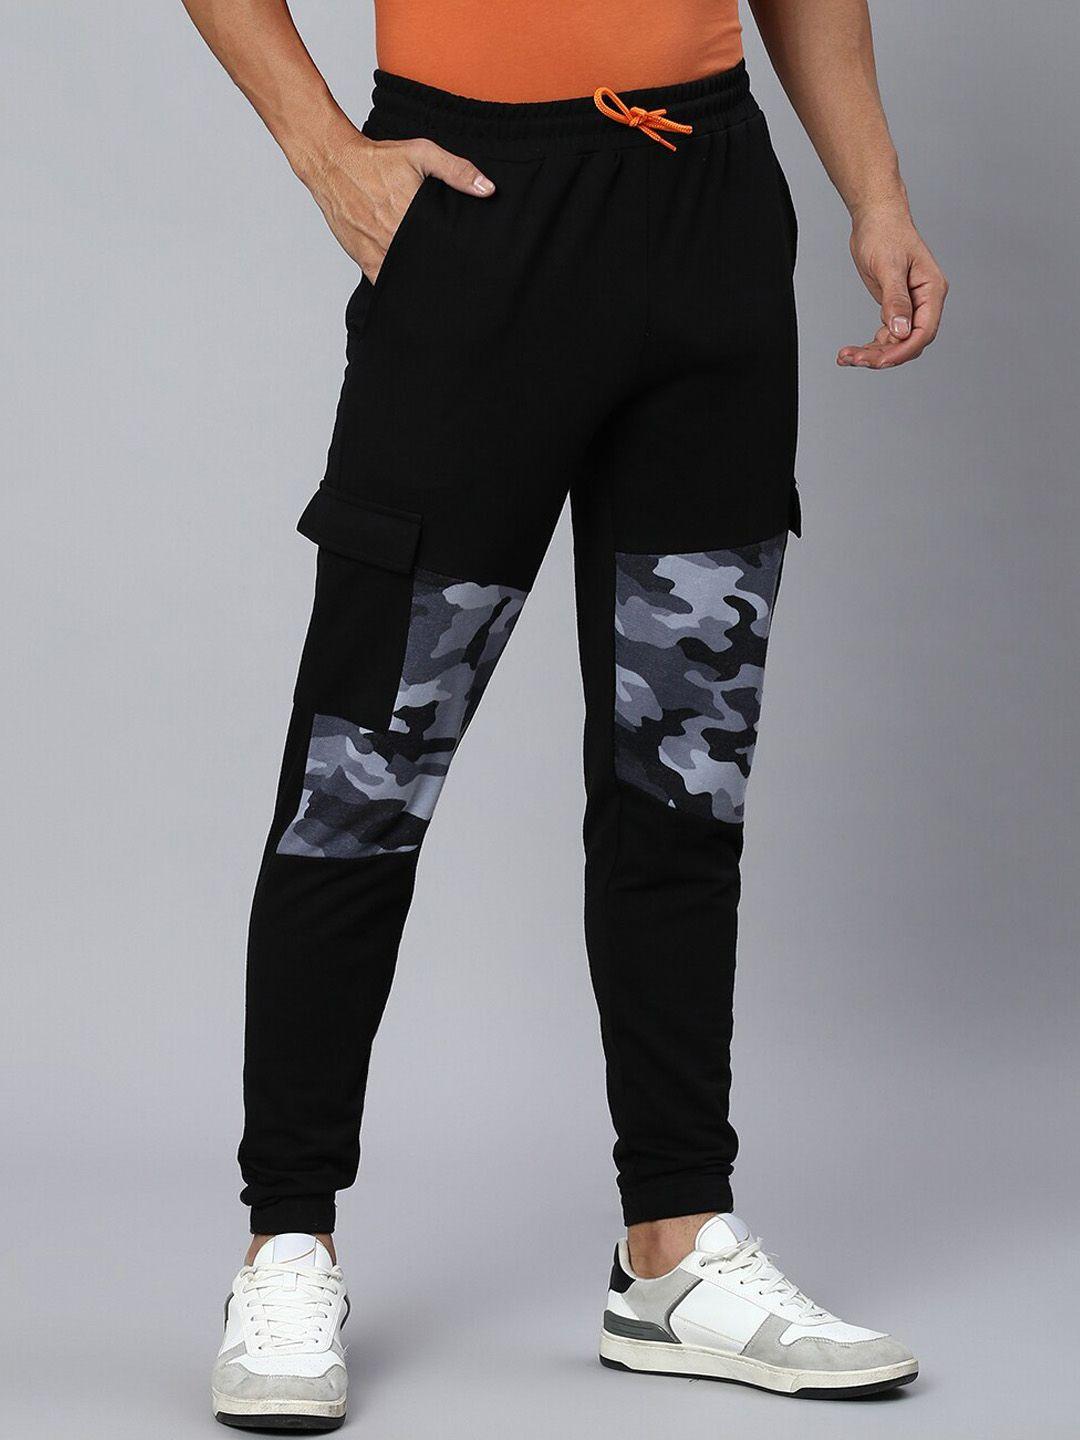 hubberholme men abstract printed cotton joggers